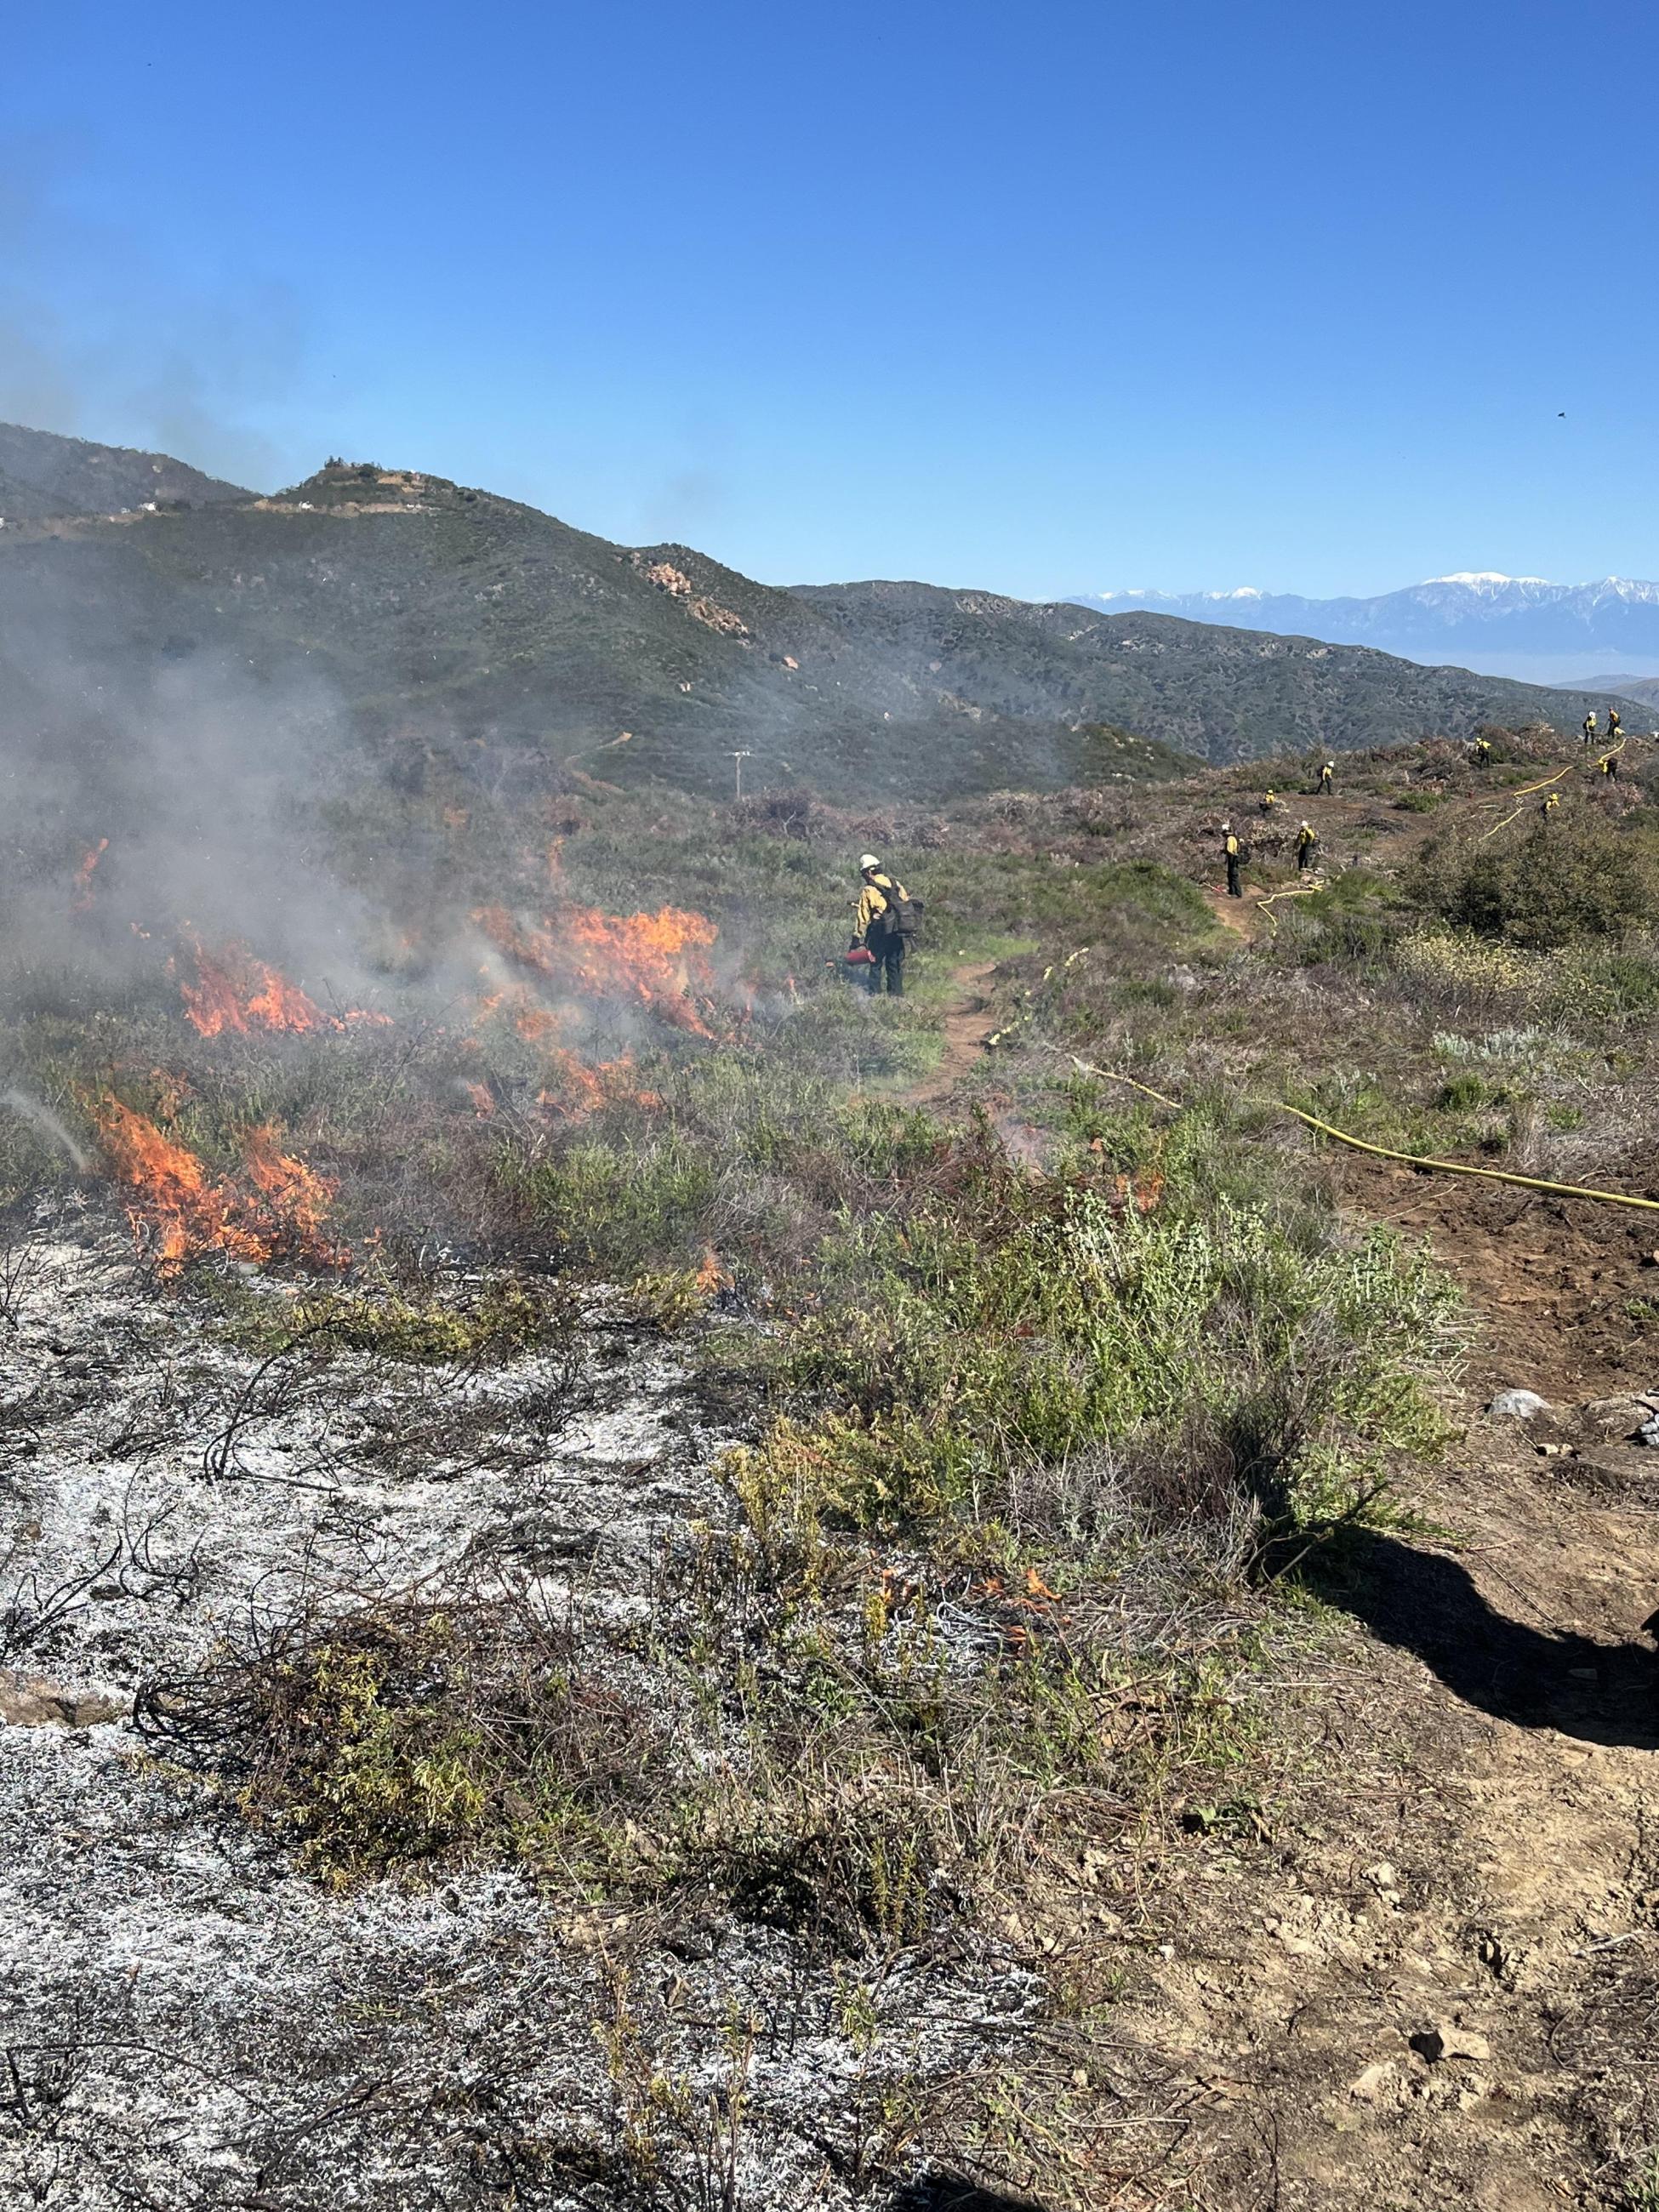 Picture shows several firefighters on a mountain. Some have a drip torch igniting the fuels, while others are monitoring the burn. There is fire hose on the ground.